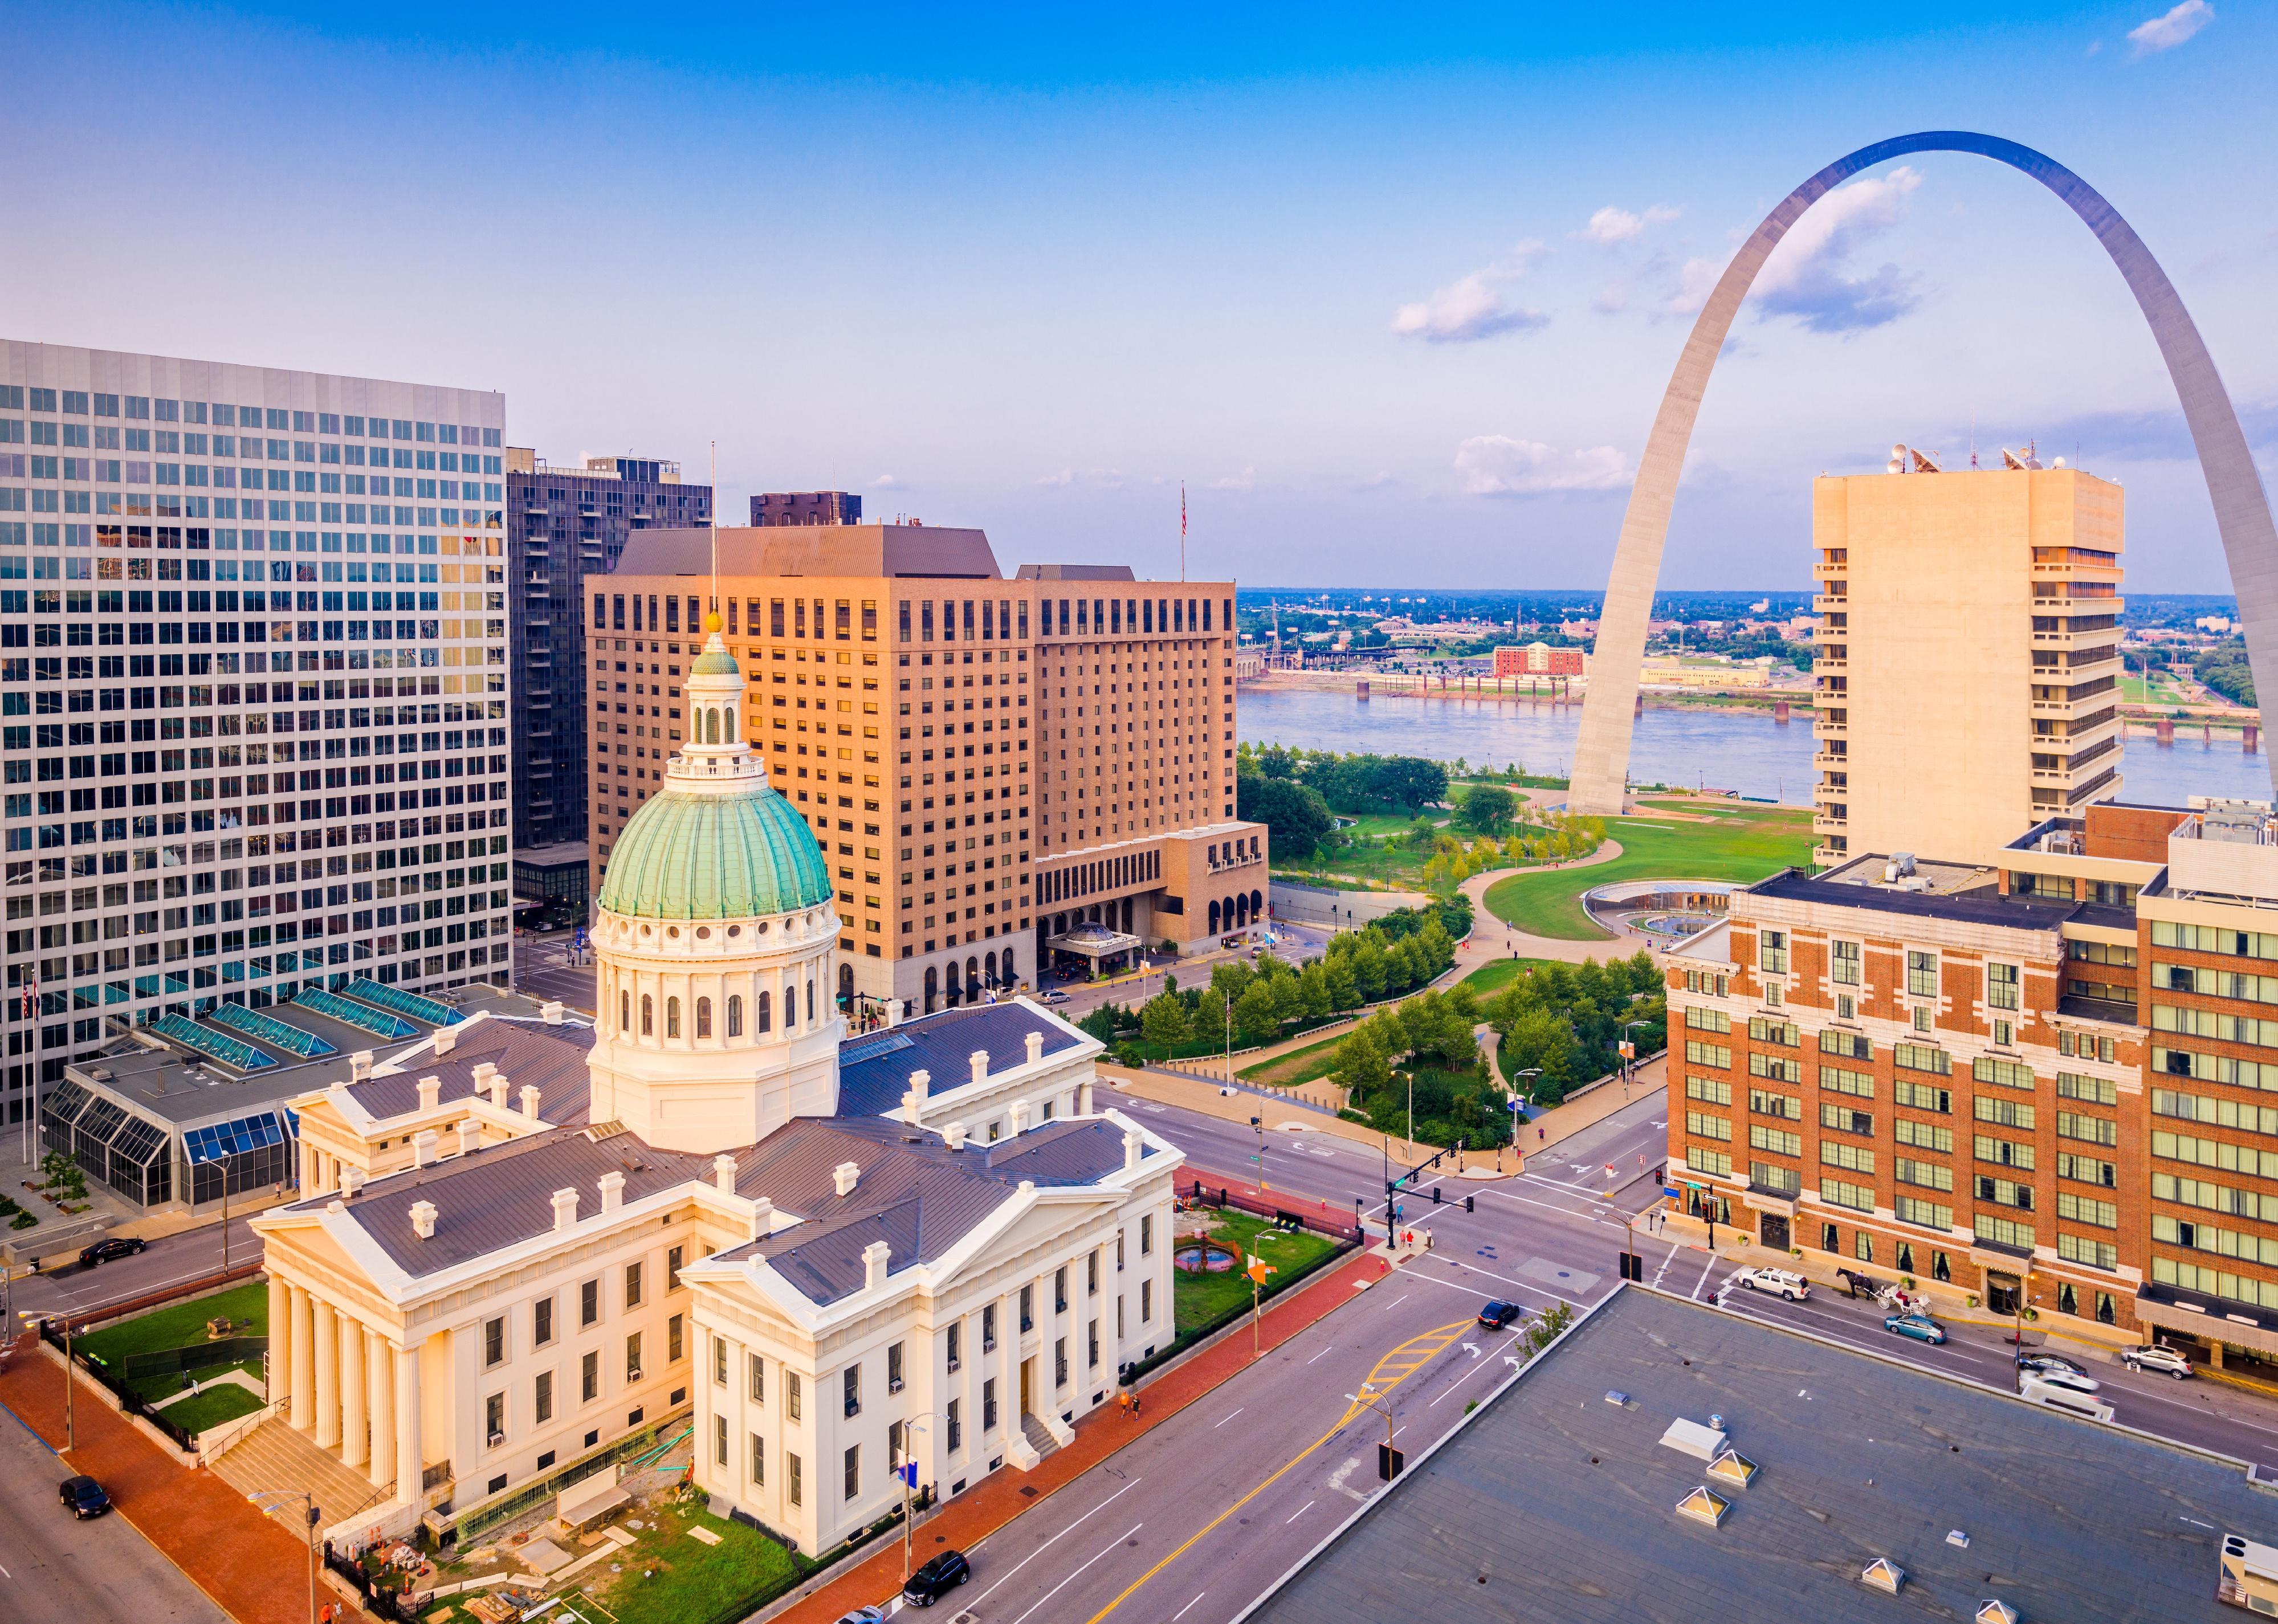 An aerial view of the Old Courthouse and Gateway Arch in St. Louis.